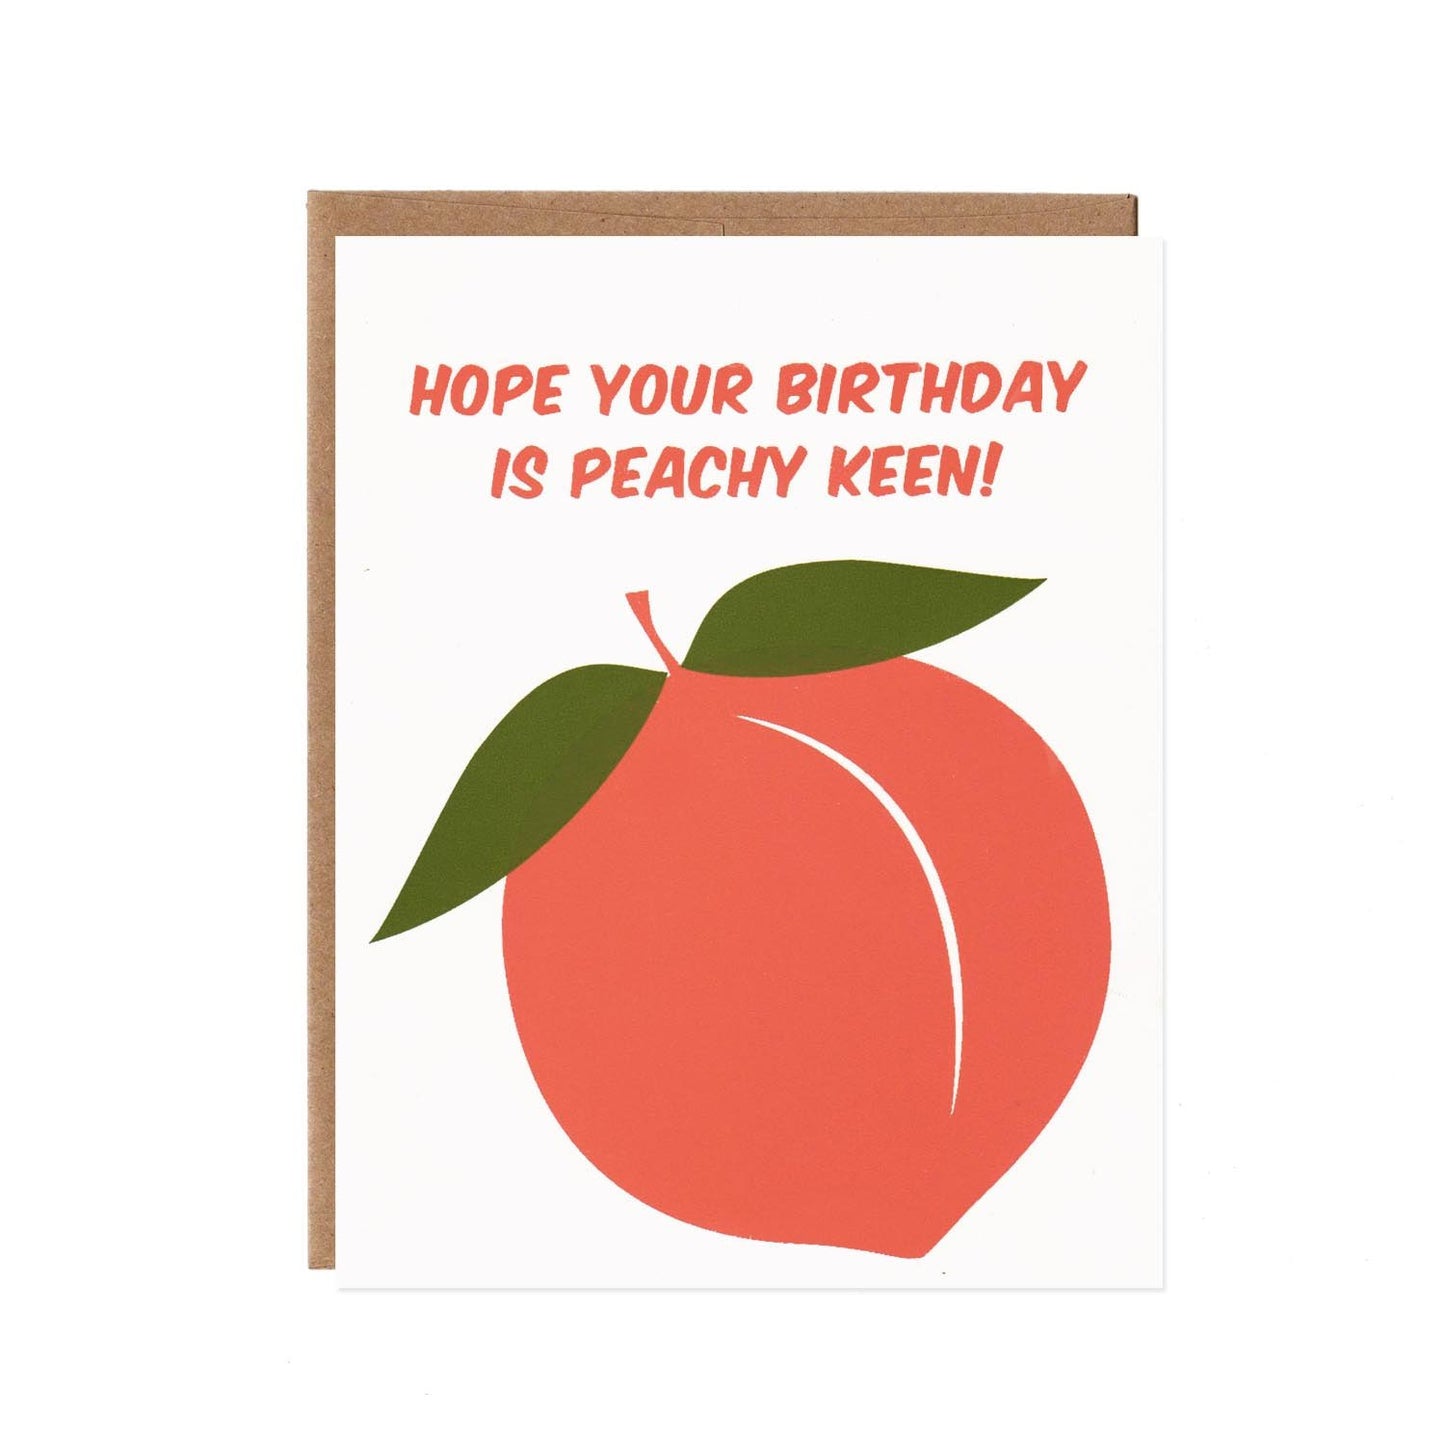 Product image for Peachy Keen Birthday Card